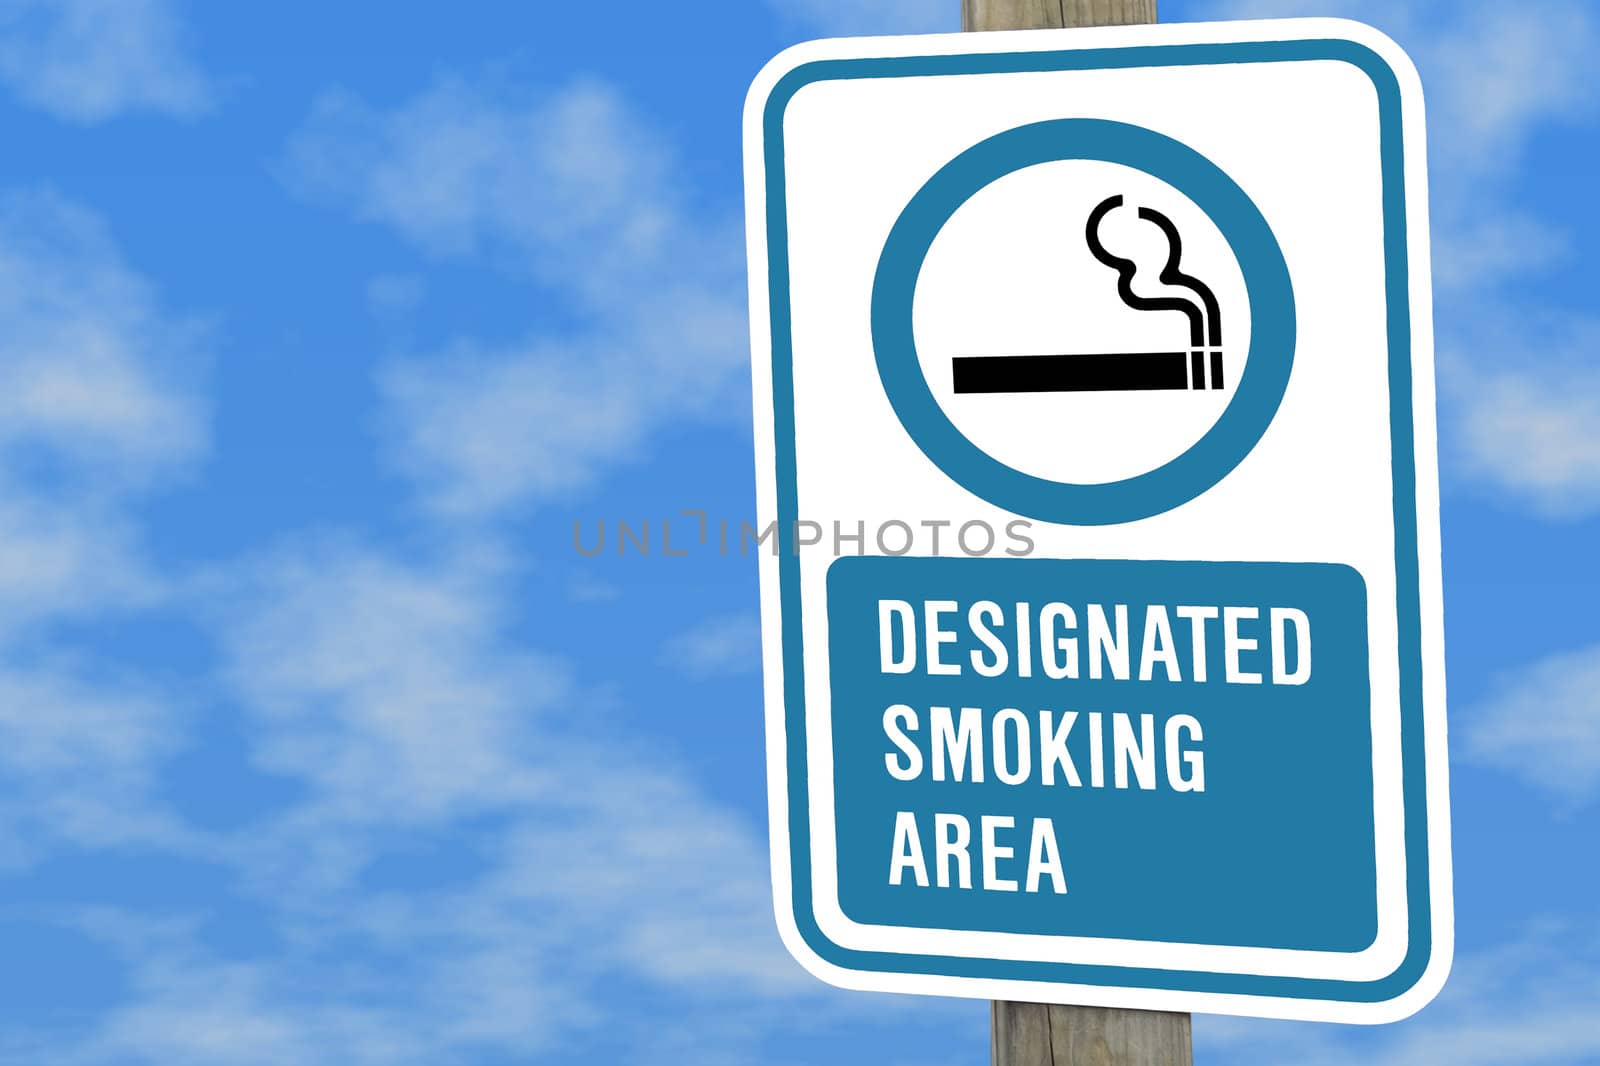 Designated smoking sign on a post against a blue sky with puffy white clouds